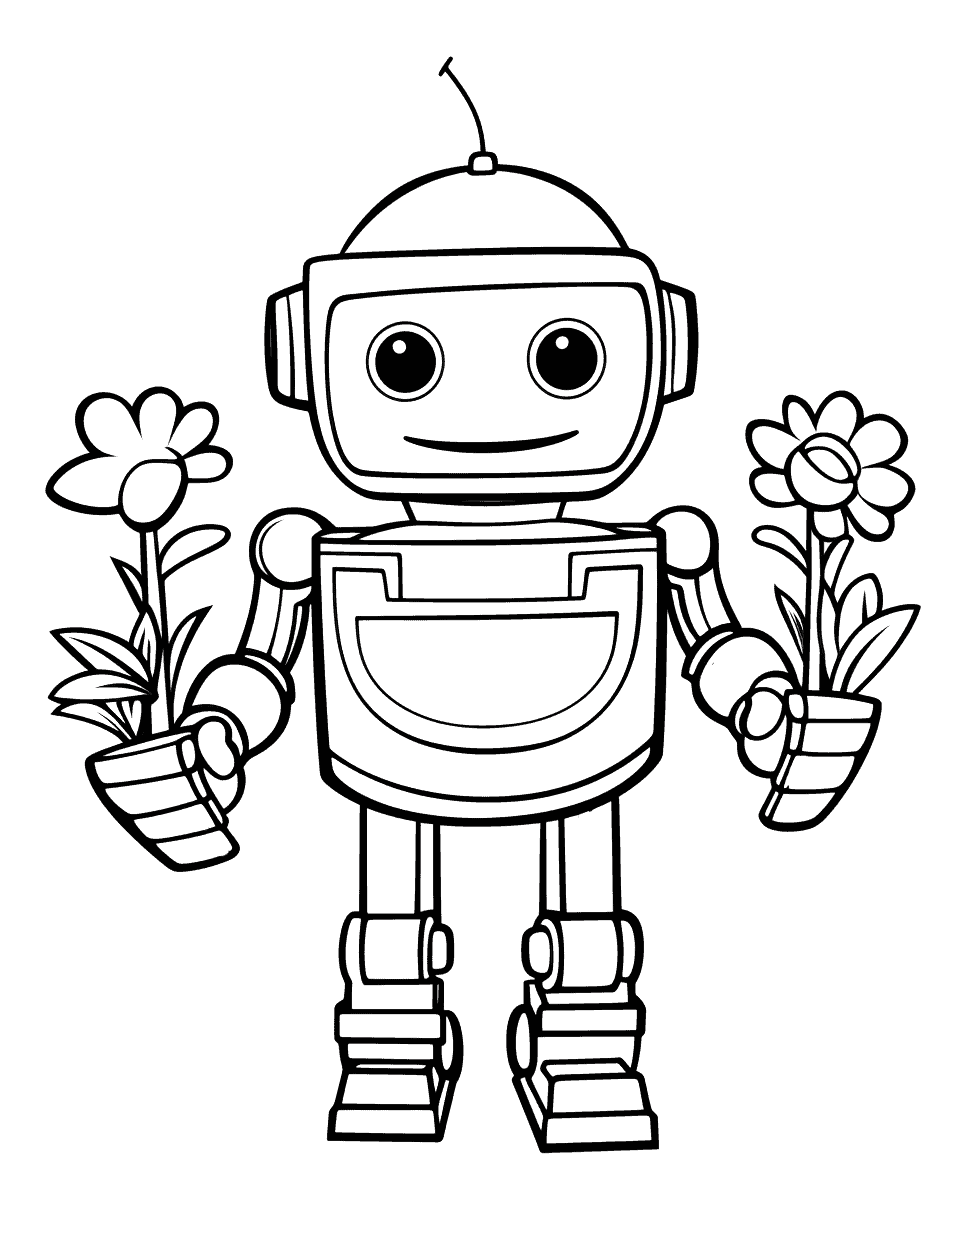 Gardening Robot with Flowers Coloring Page - A gardening robot with flowers in its hand, ready to plant.